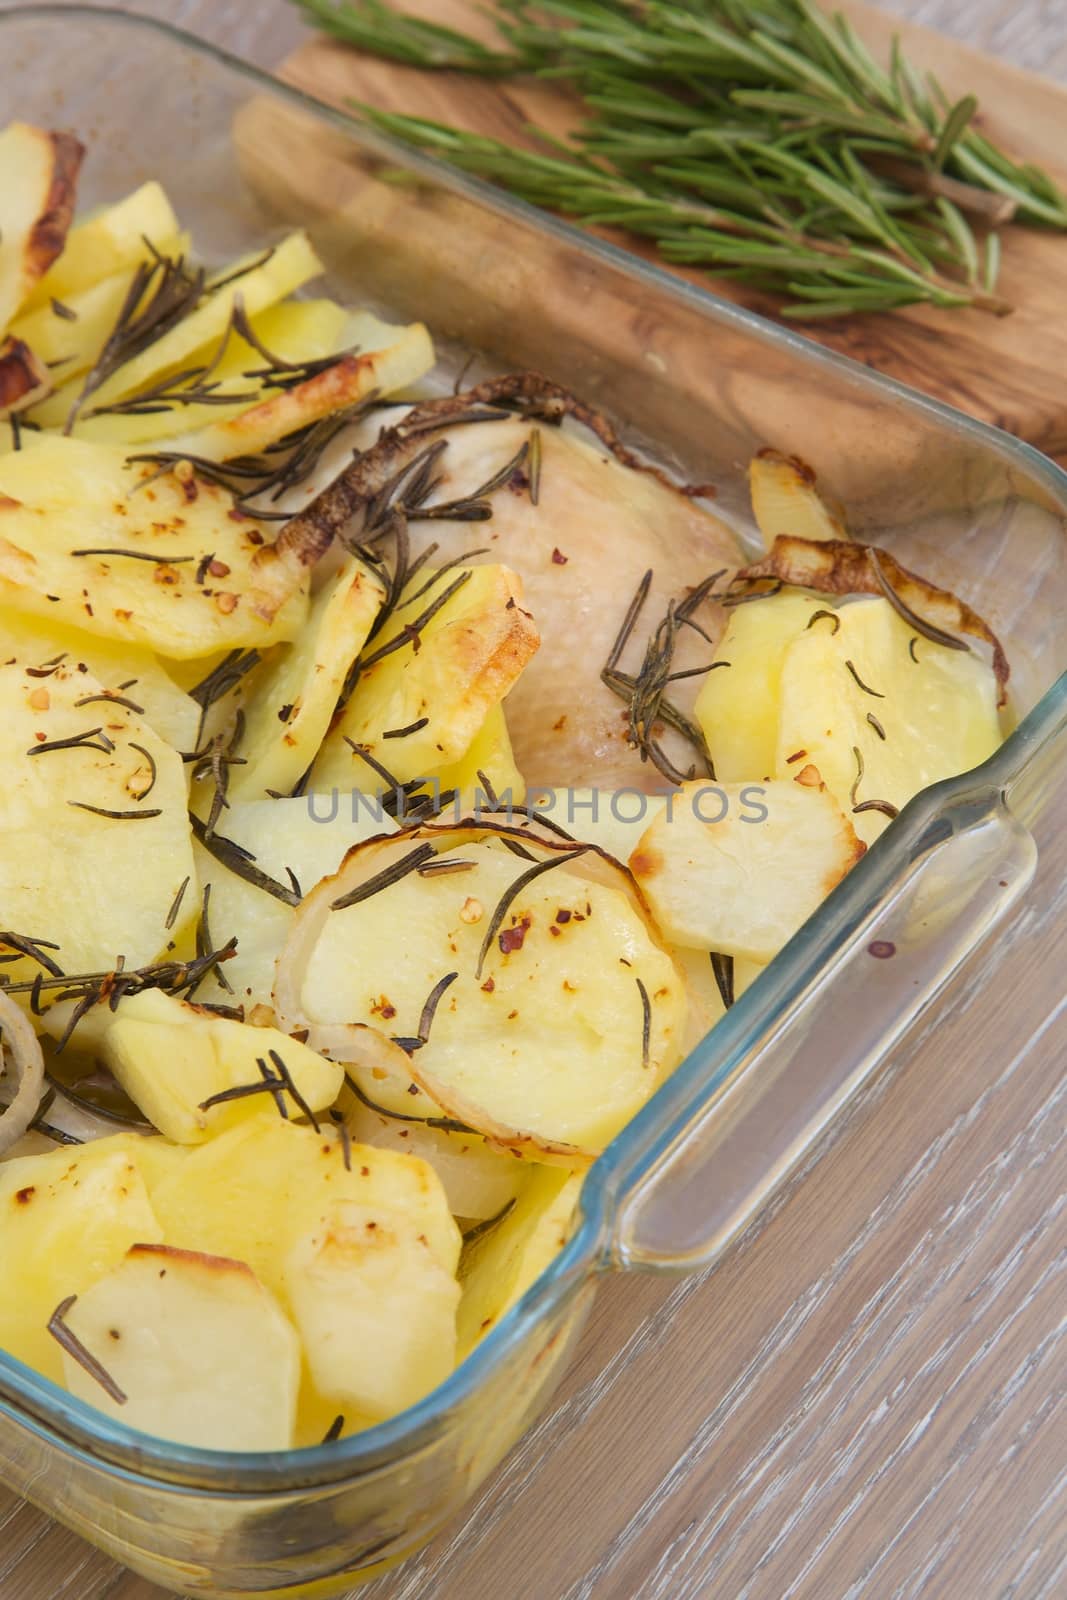 Baked potatoes with chicken and rosemary in the glass mould. Fresh rosemary on the wooden cutting board in the background